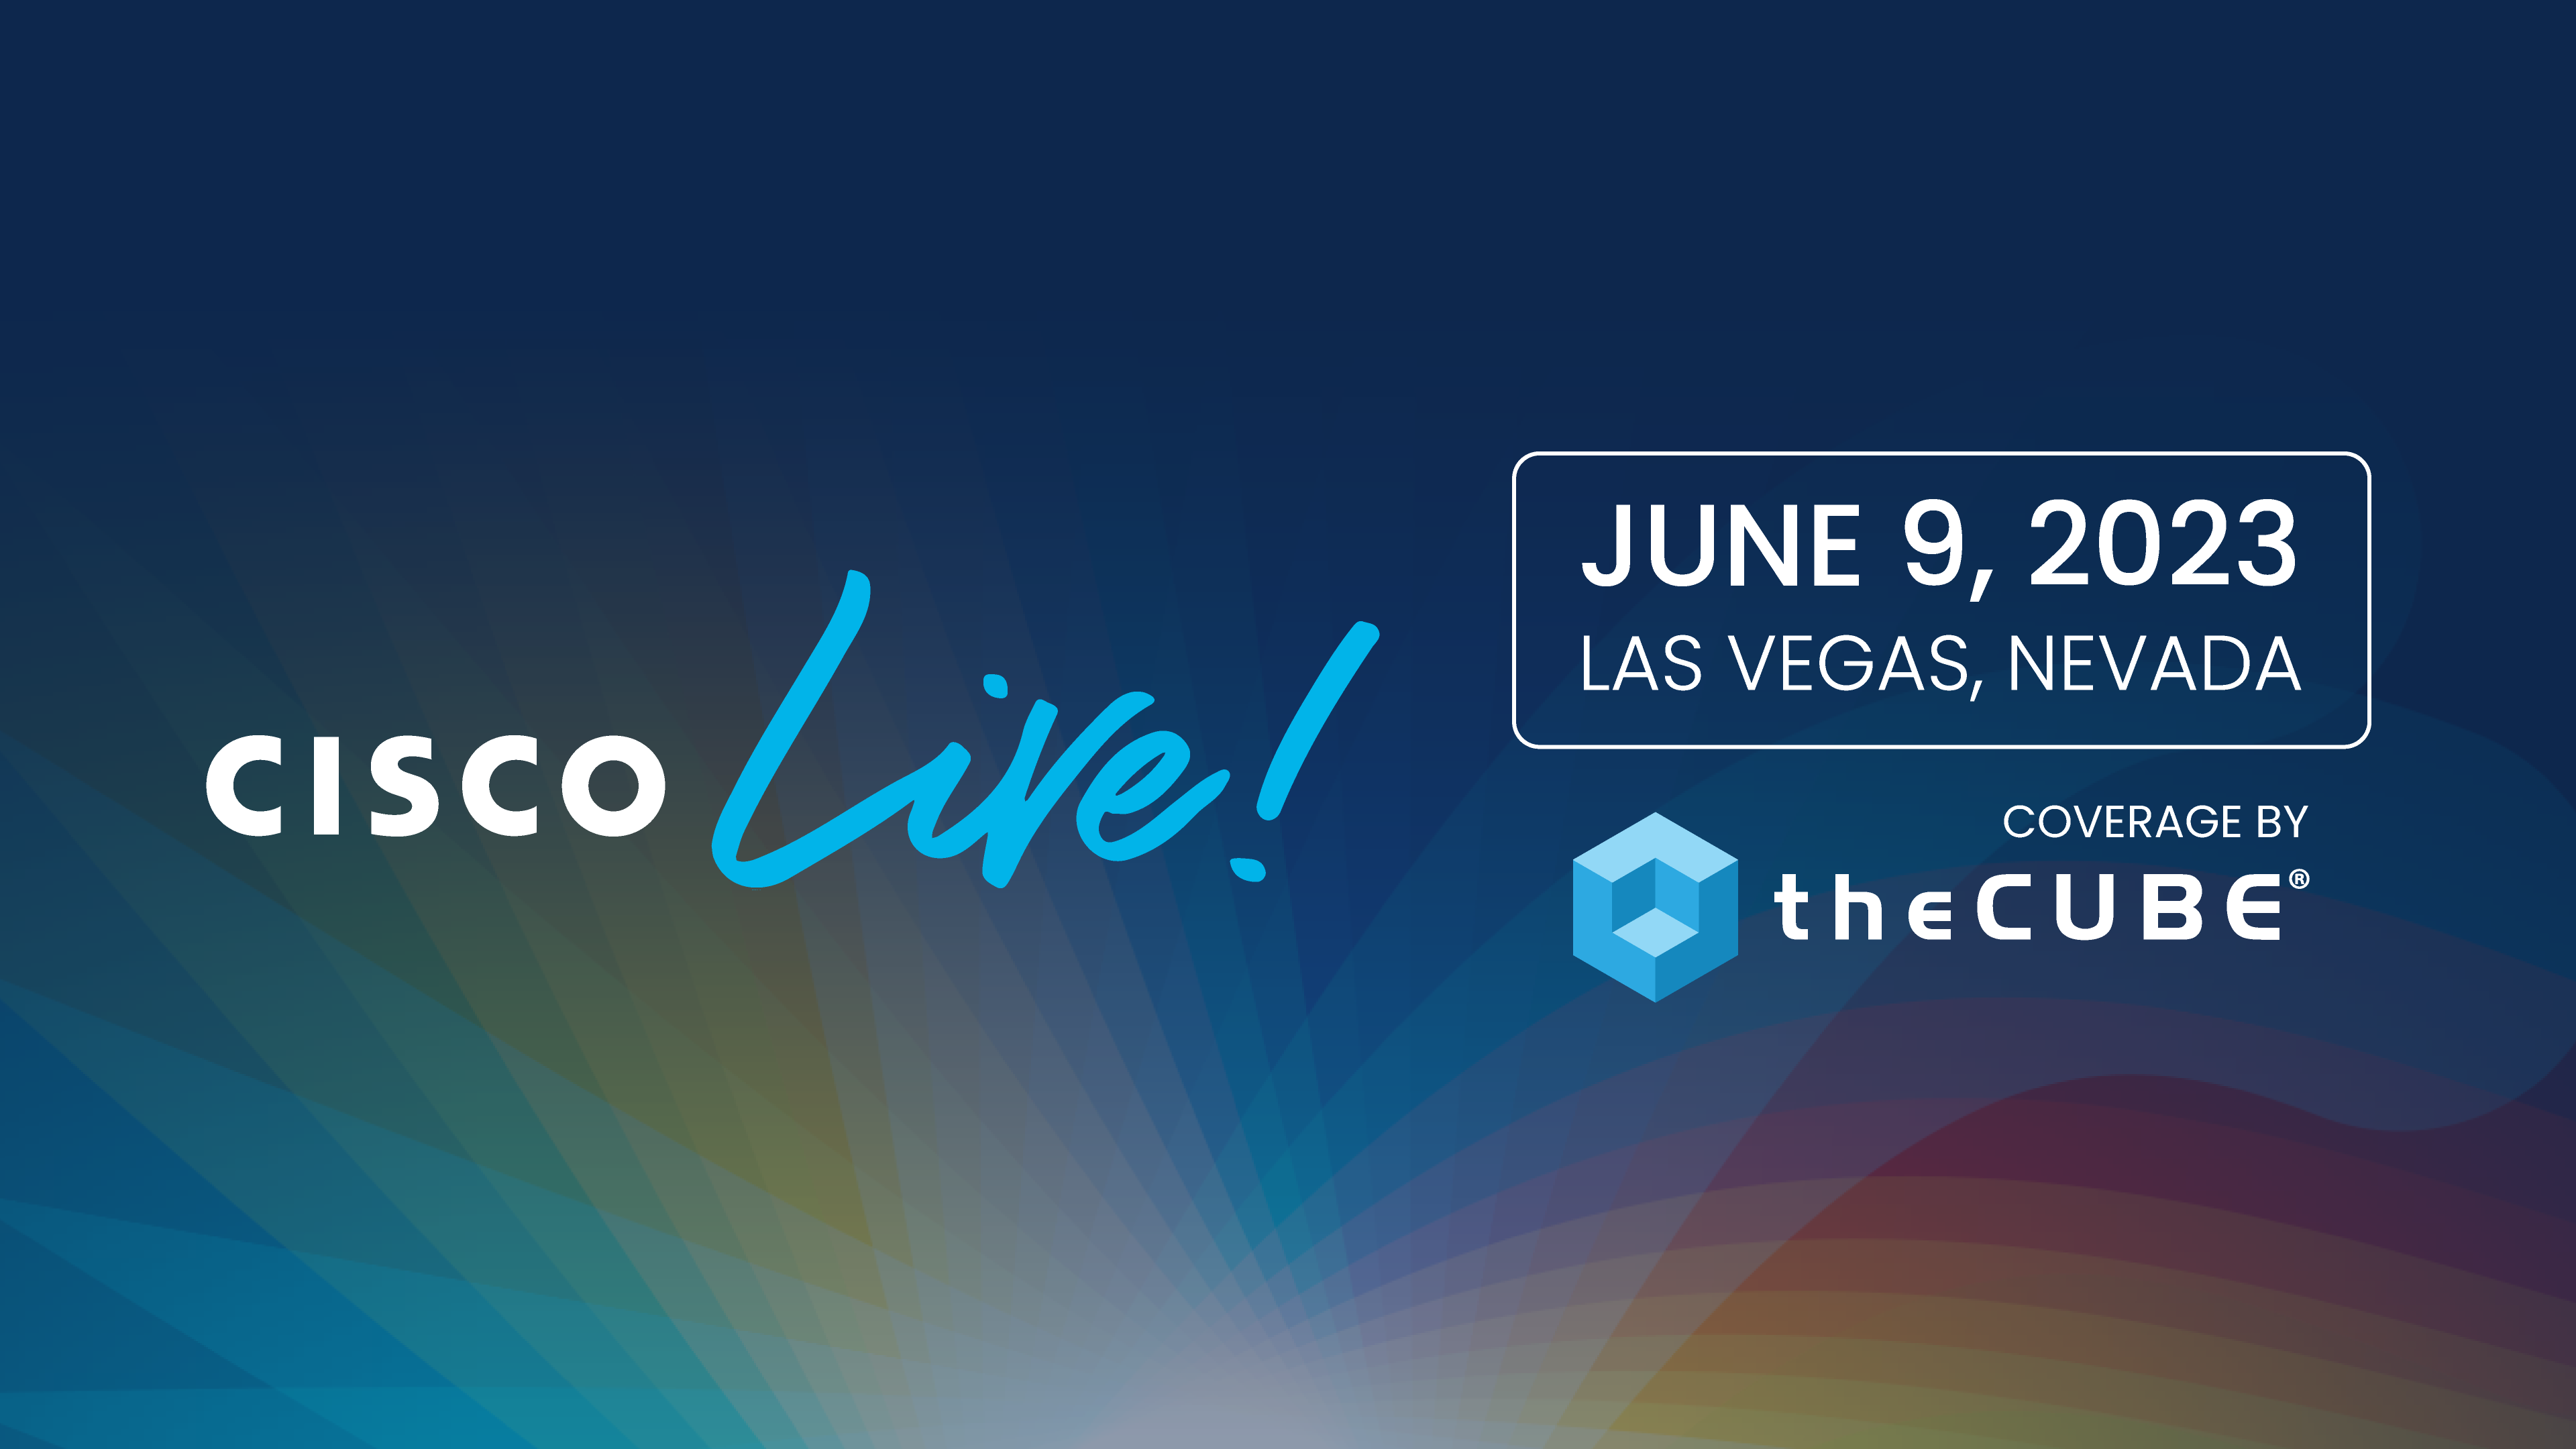 What to expect during the 'Cisco Live' event Join theCUBE June 9